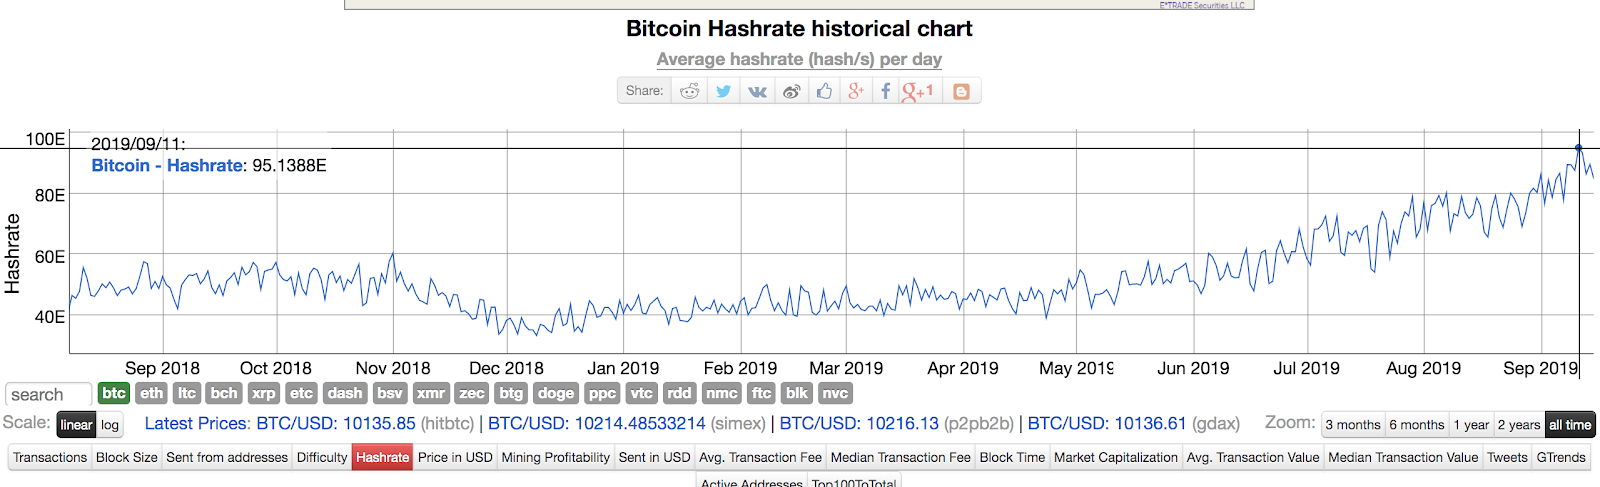 Bitcoin Hashrate, SegWit Transactions Continue To Reach All-Time Highs